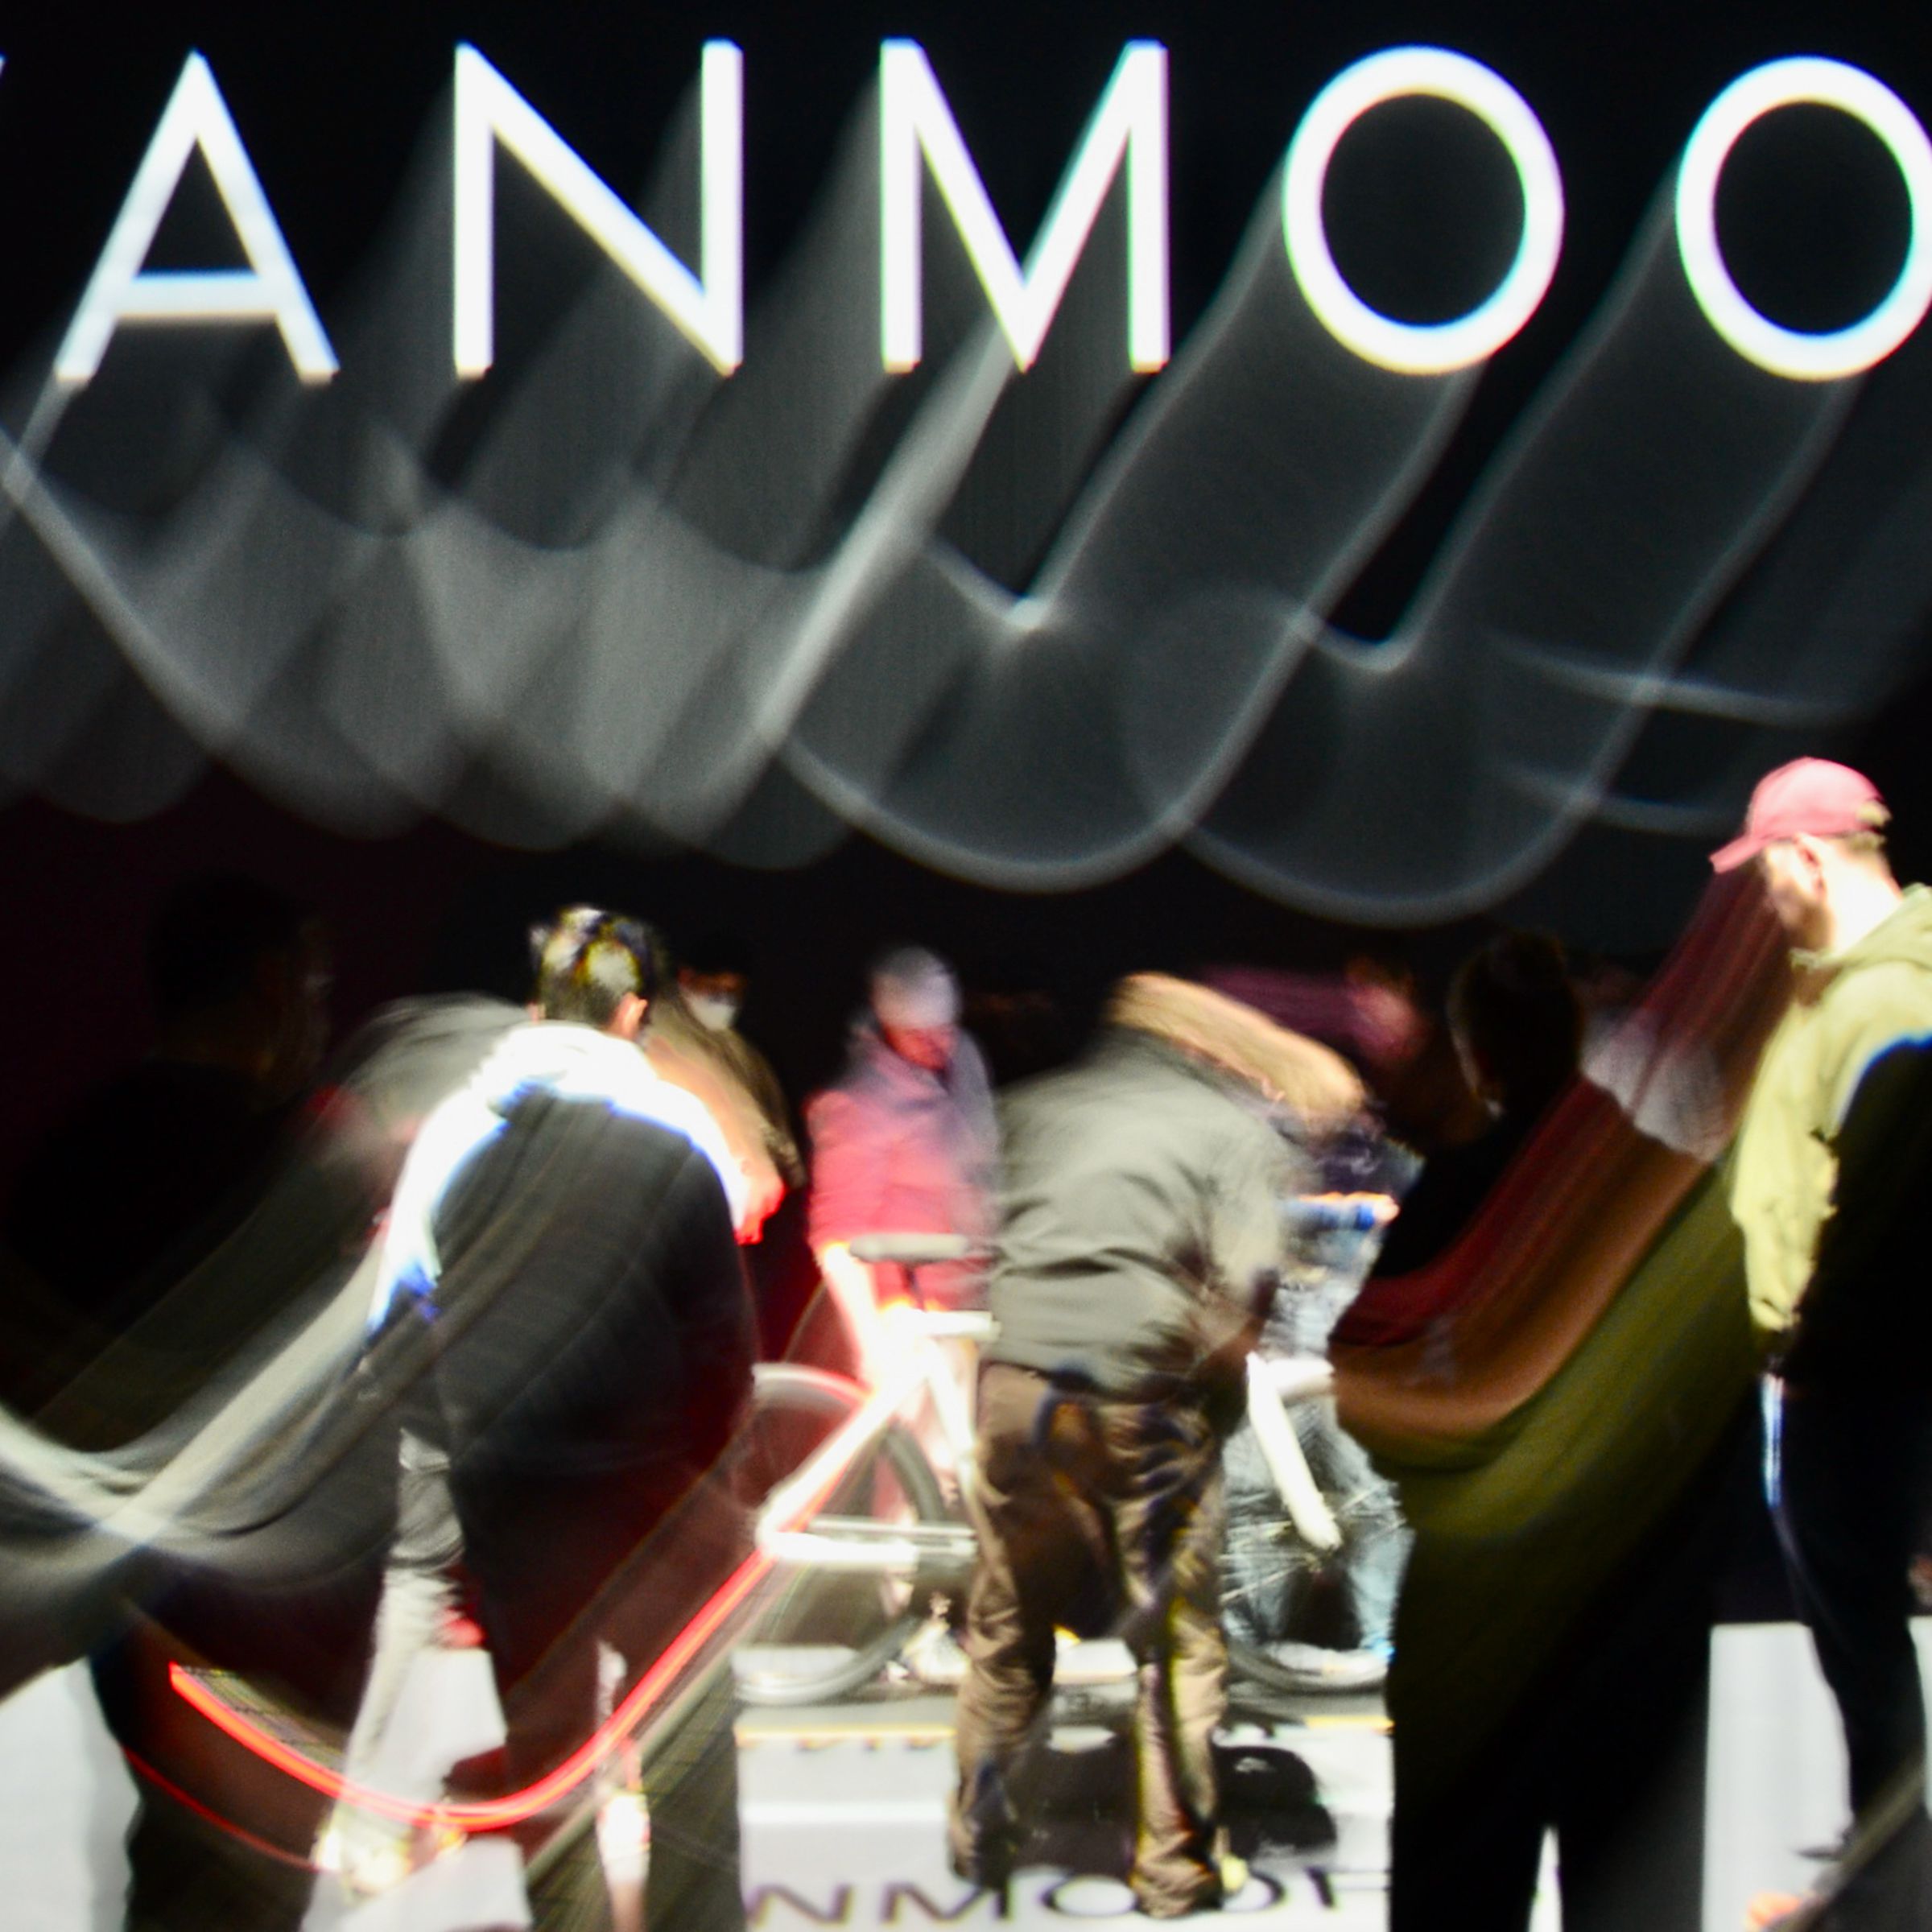 People swarm around the S5 at its reveal in March 2022. VanMoof’s future is less clear.